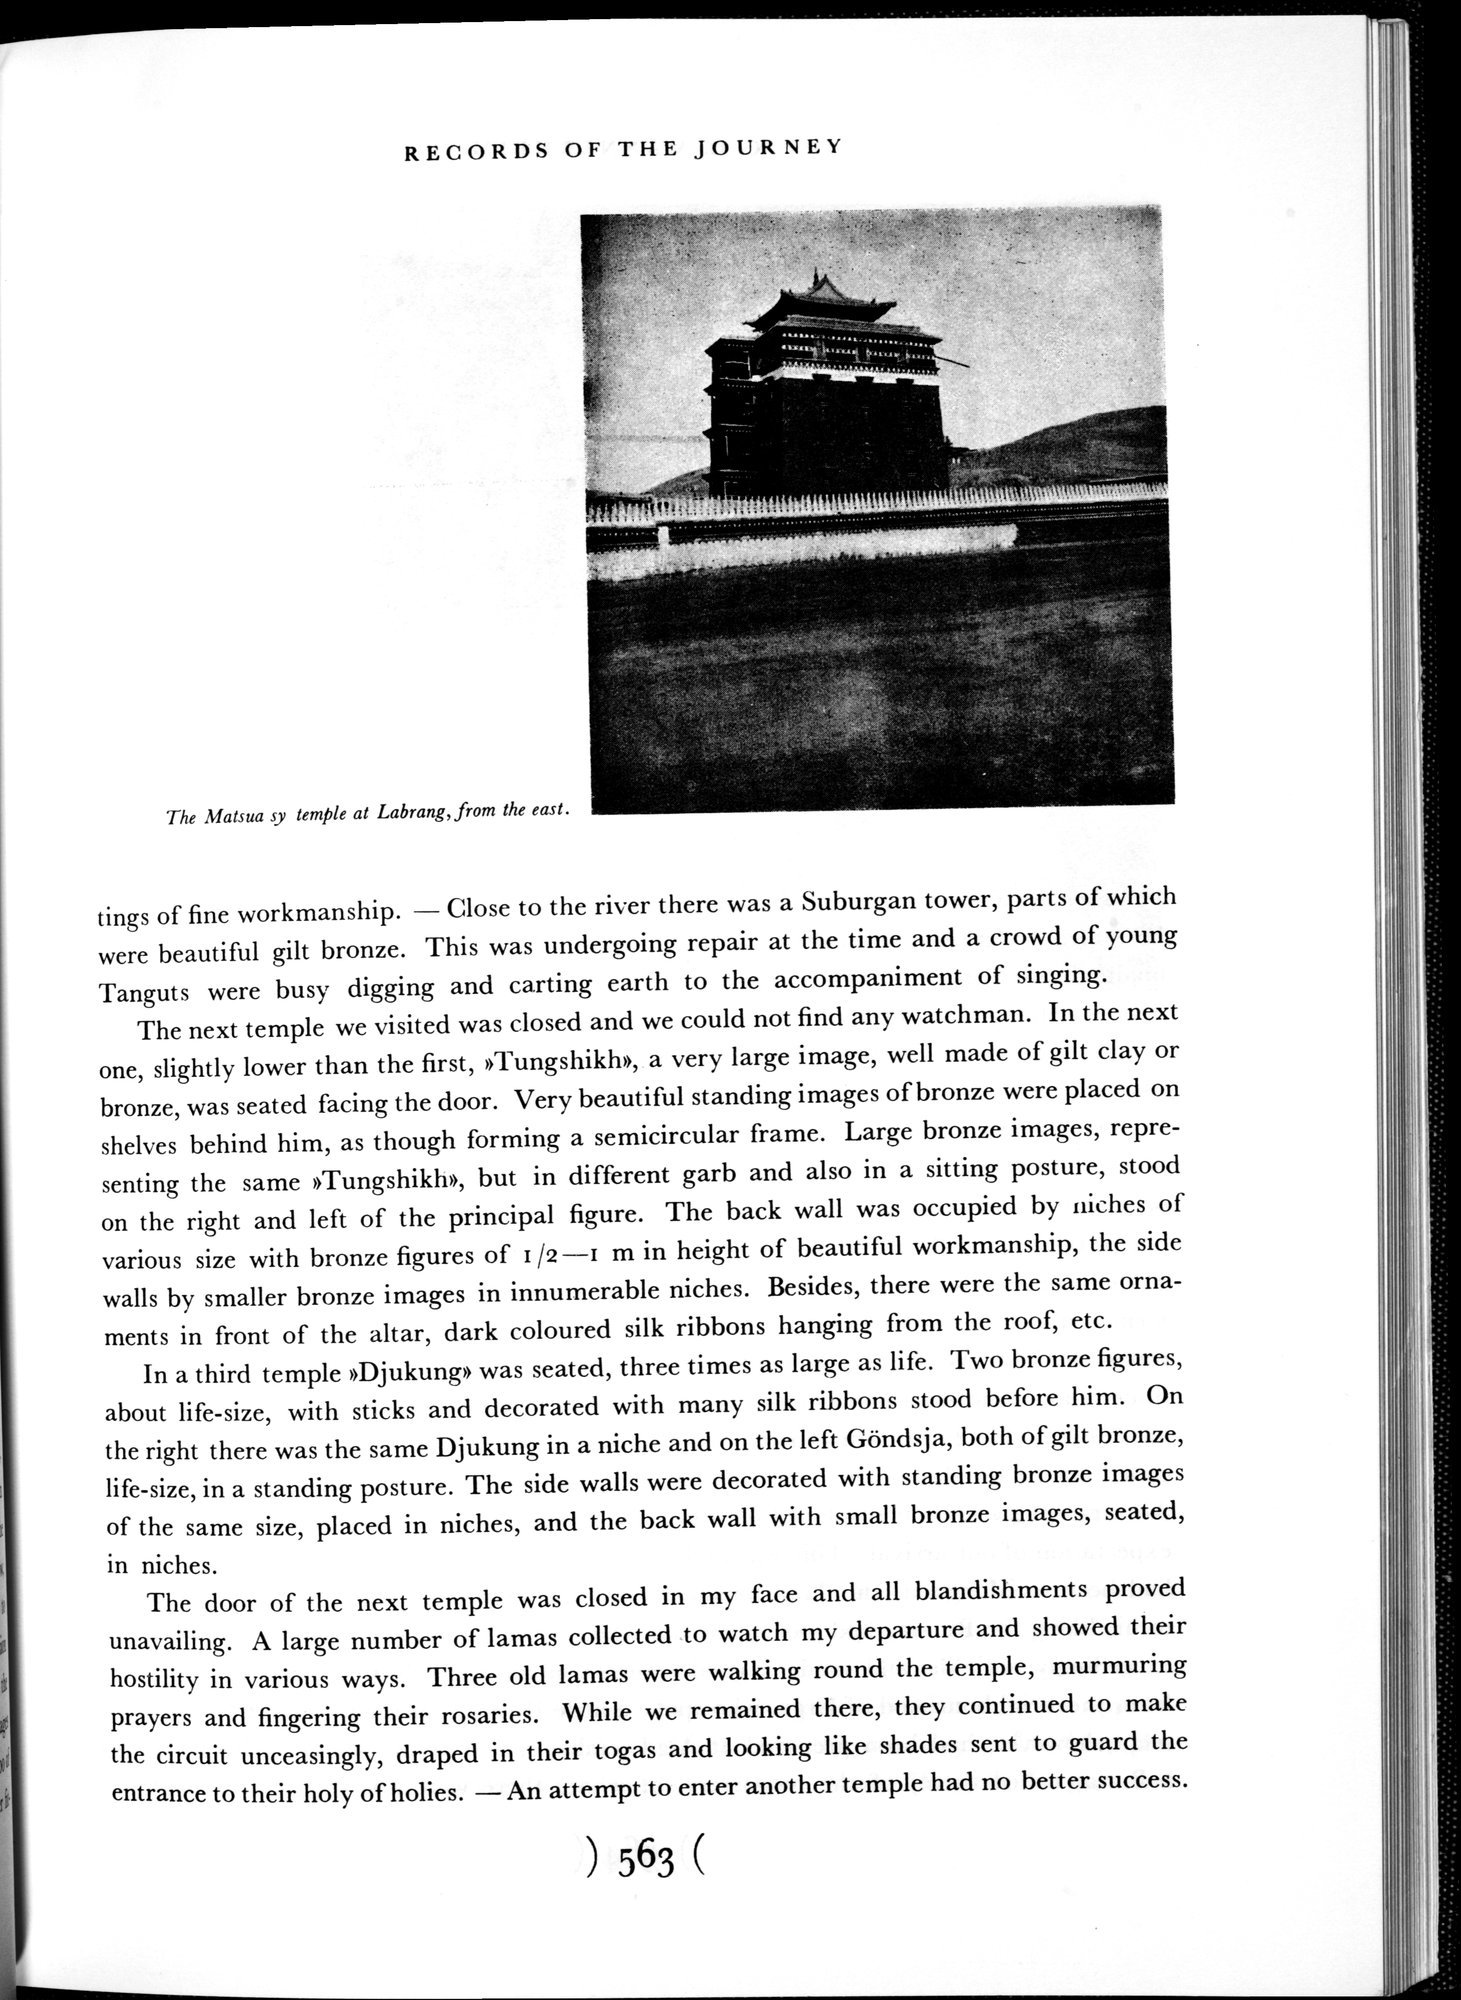 Across Asia : vol.1 / Page 569 (Grayscale High Resolution Image)